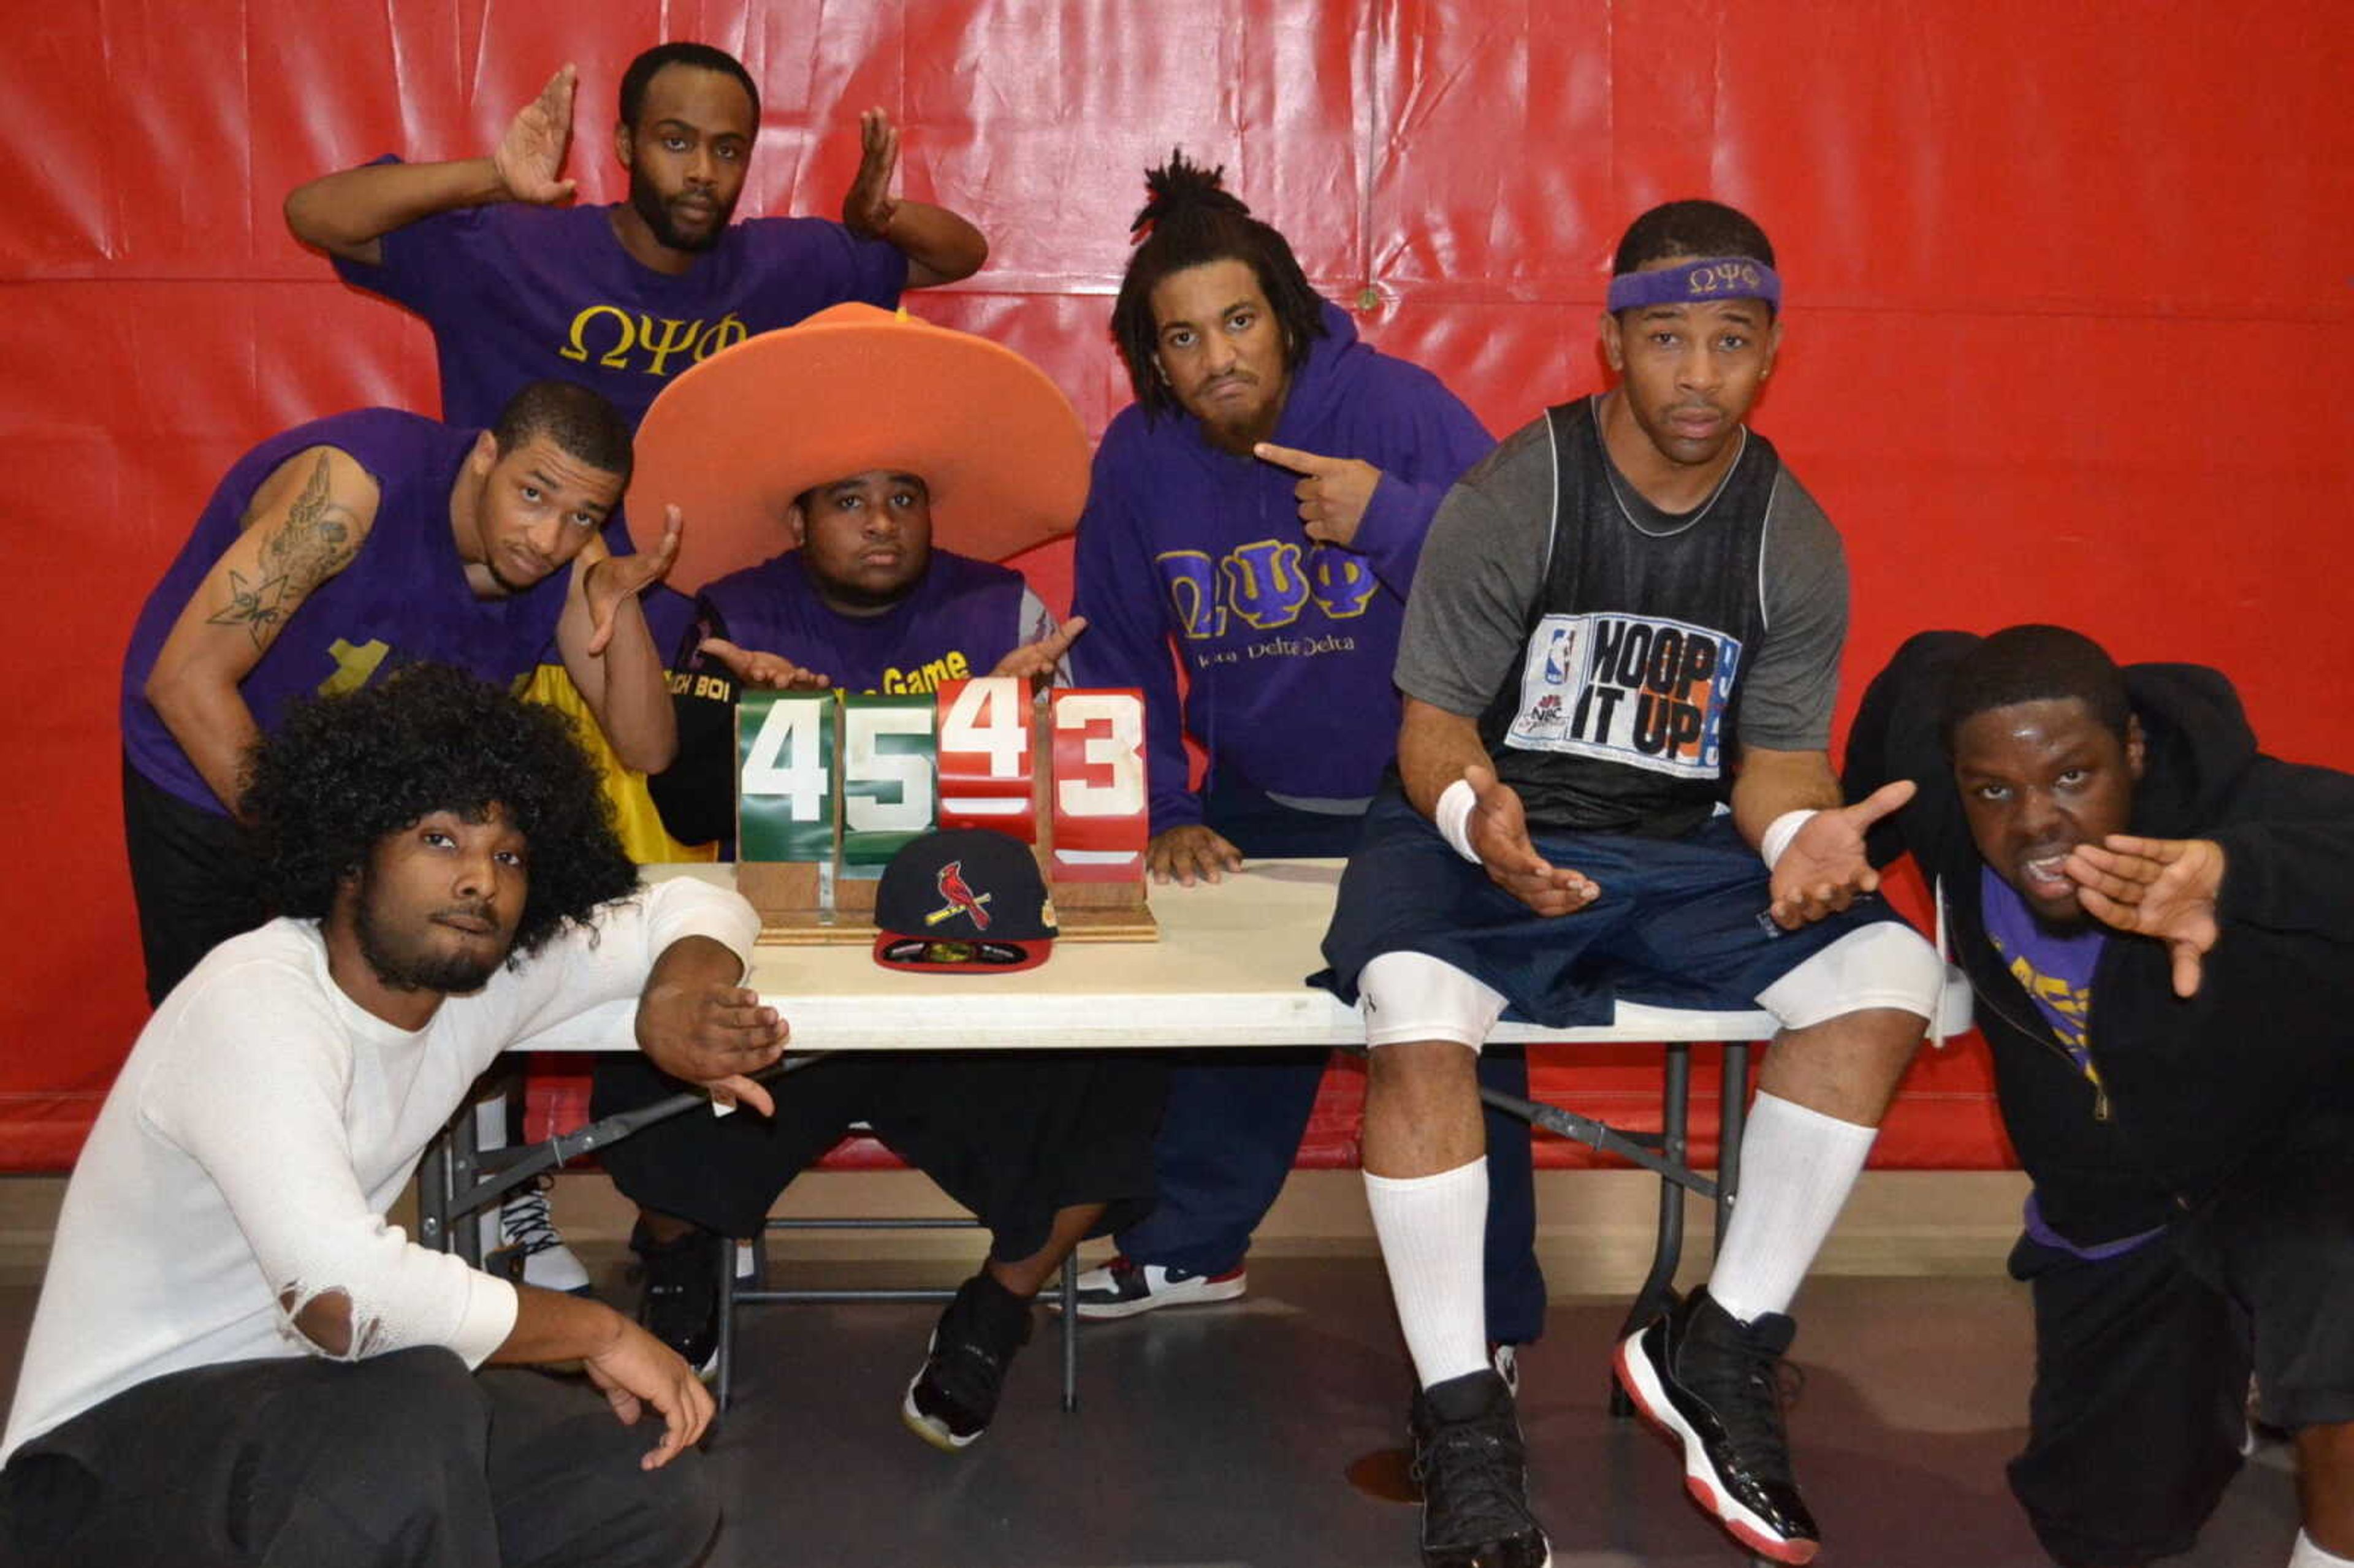 Top: Omega Psi Phi members Joshua Powell, Desmond Bryant, Remington Kelly, Thomas Nellums, Jamar Dowdy, Dominique Bailey and Tajai Sullivan after their victory against the Alpha Phi Alpha fraternity in a charity basketball game. - Submitted photo